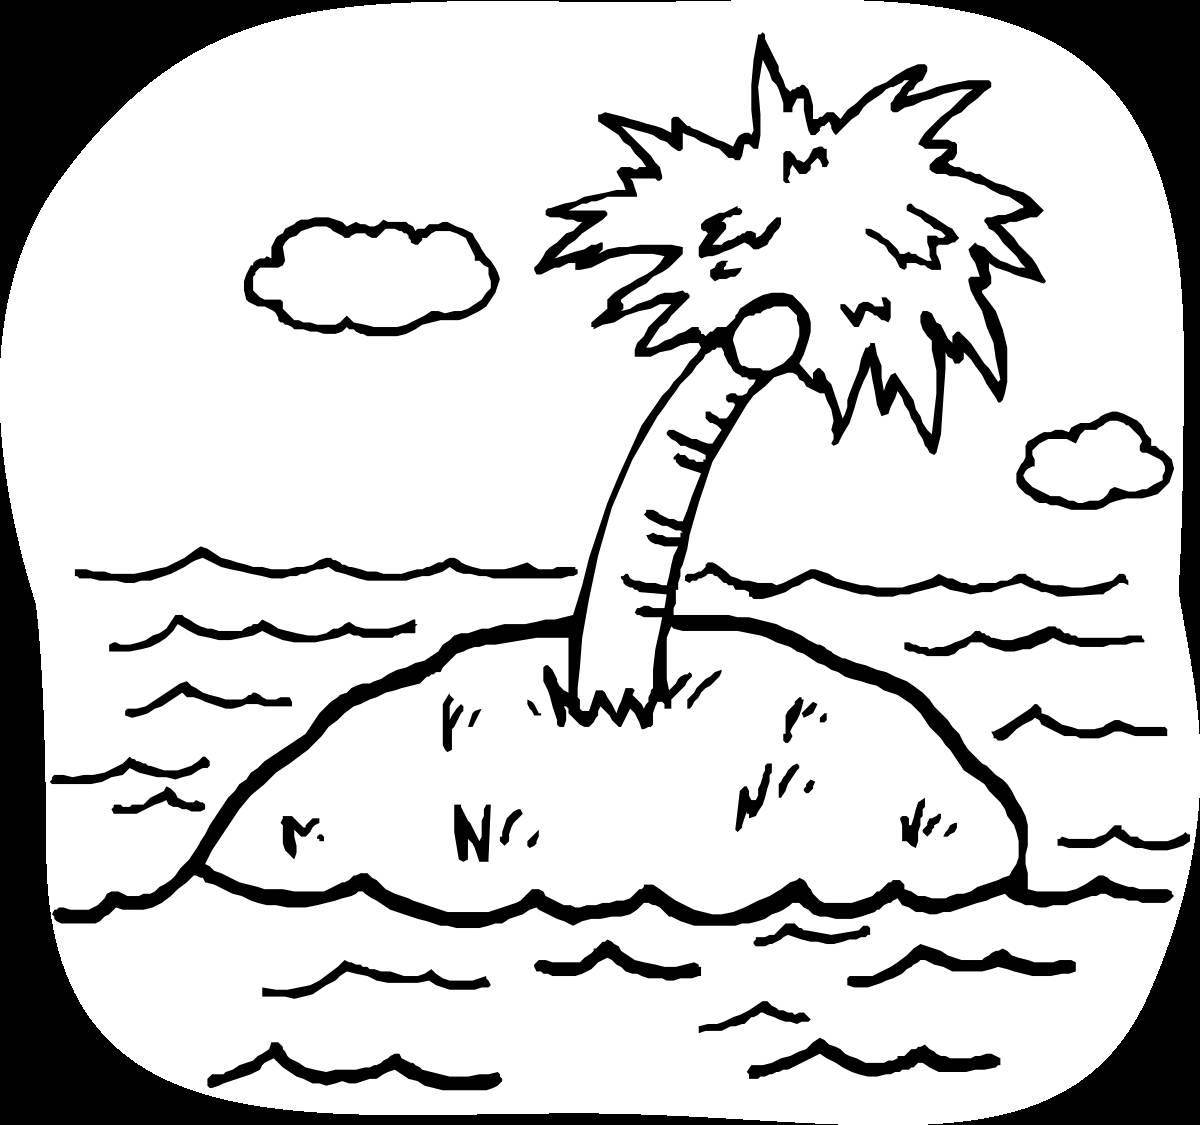 Coloring page charming desert island